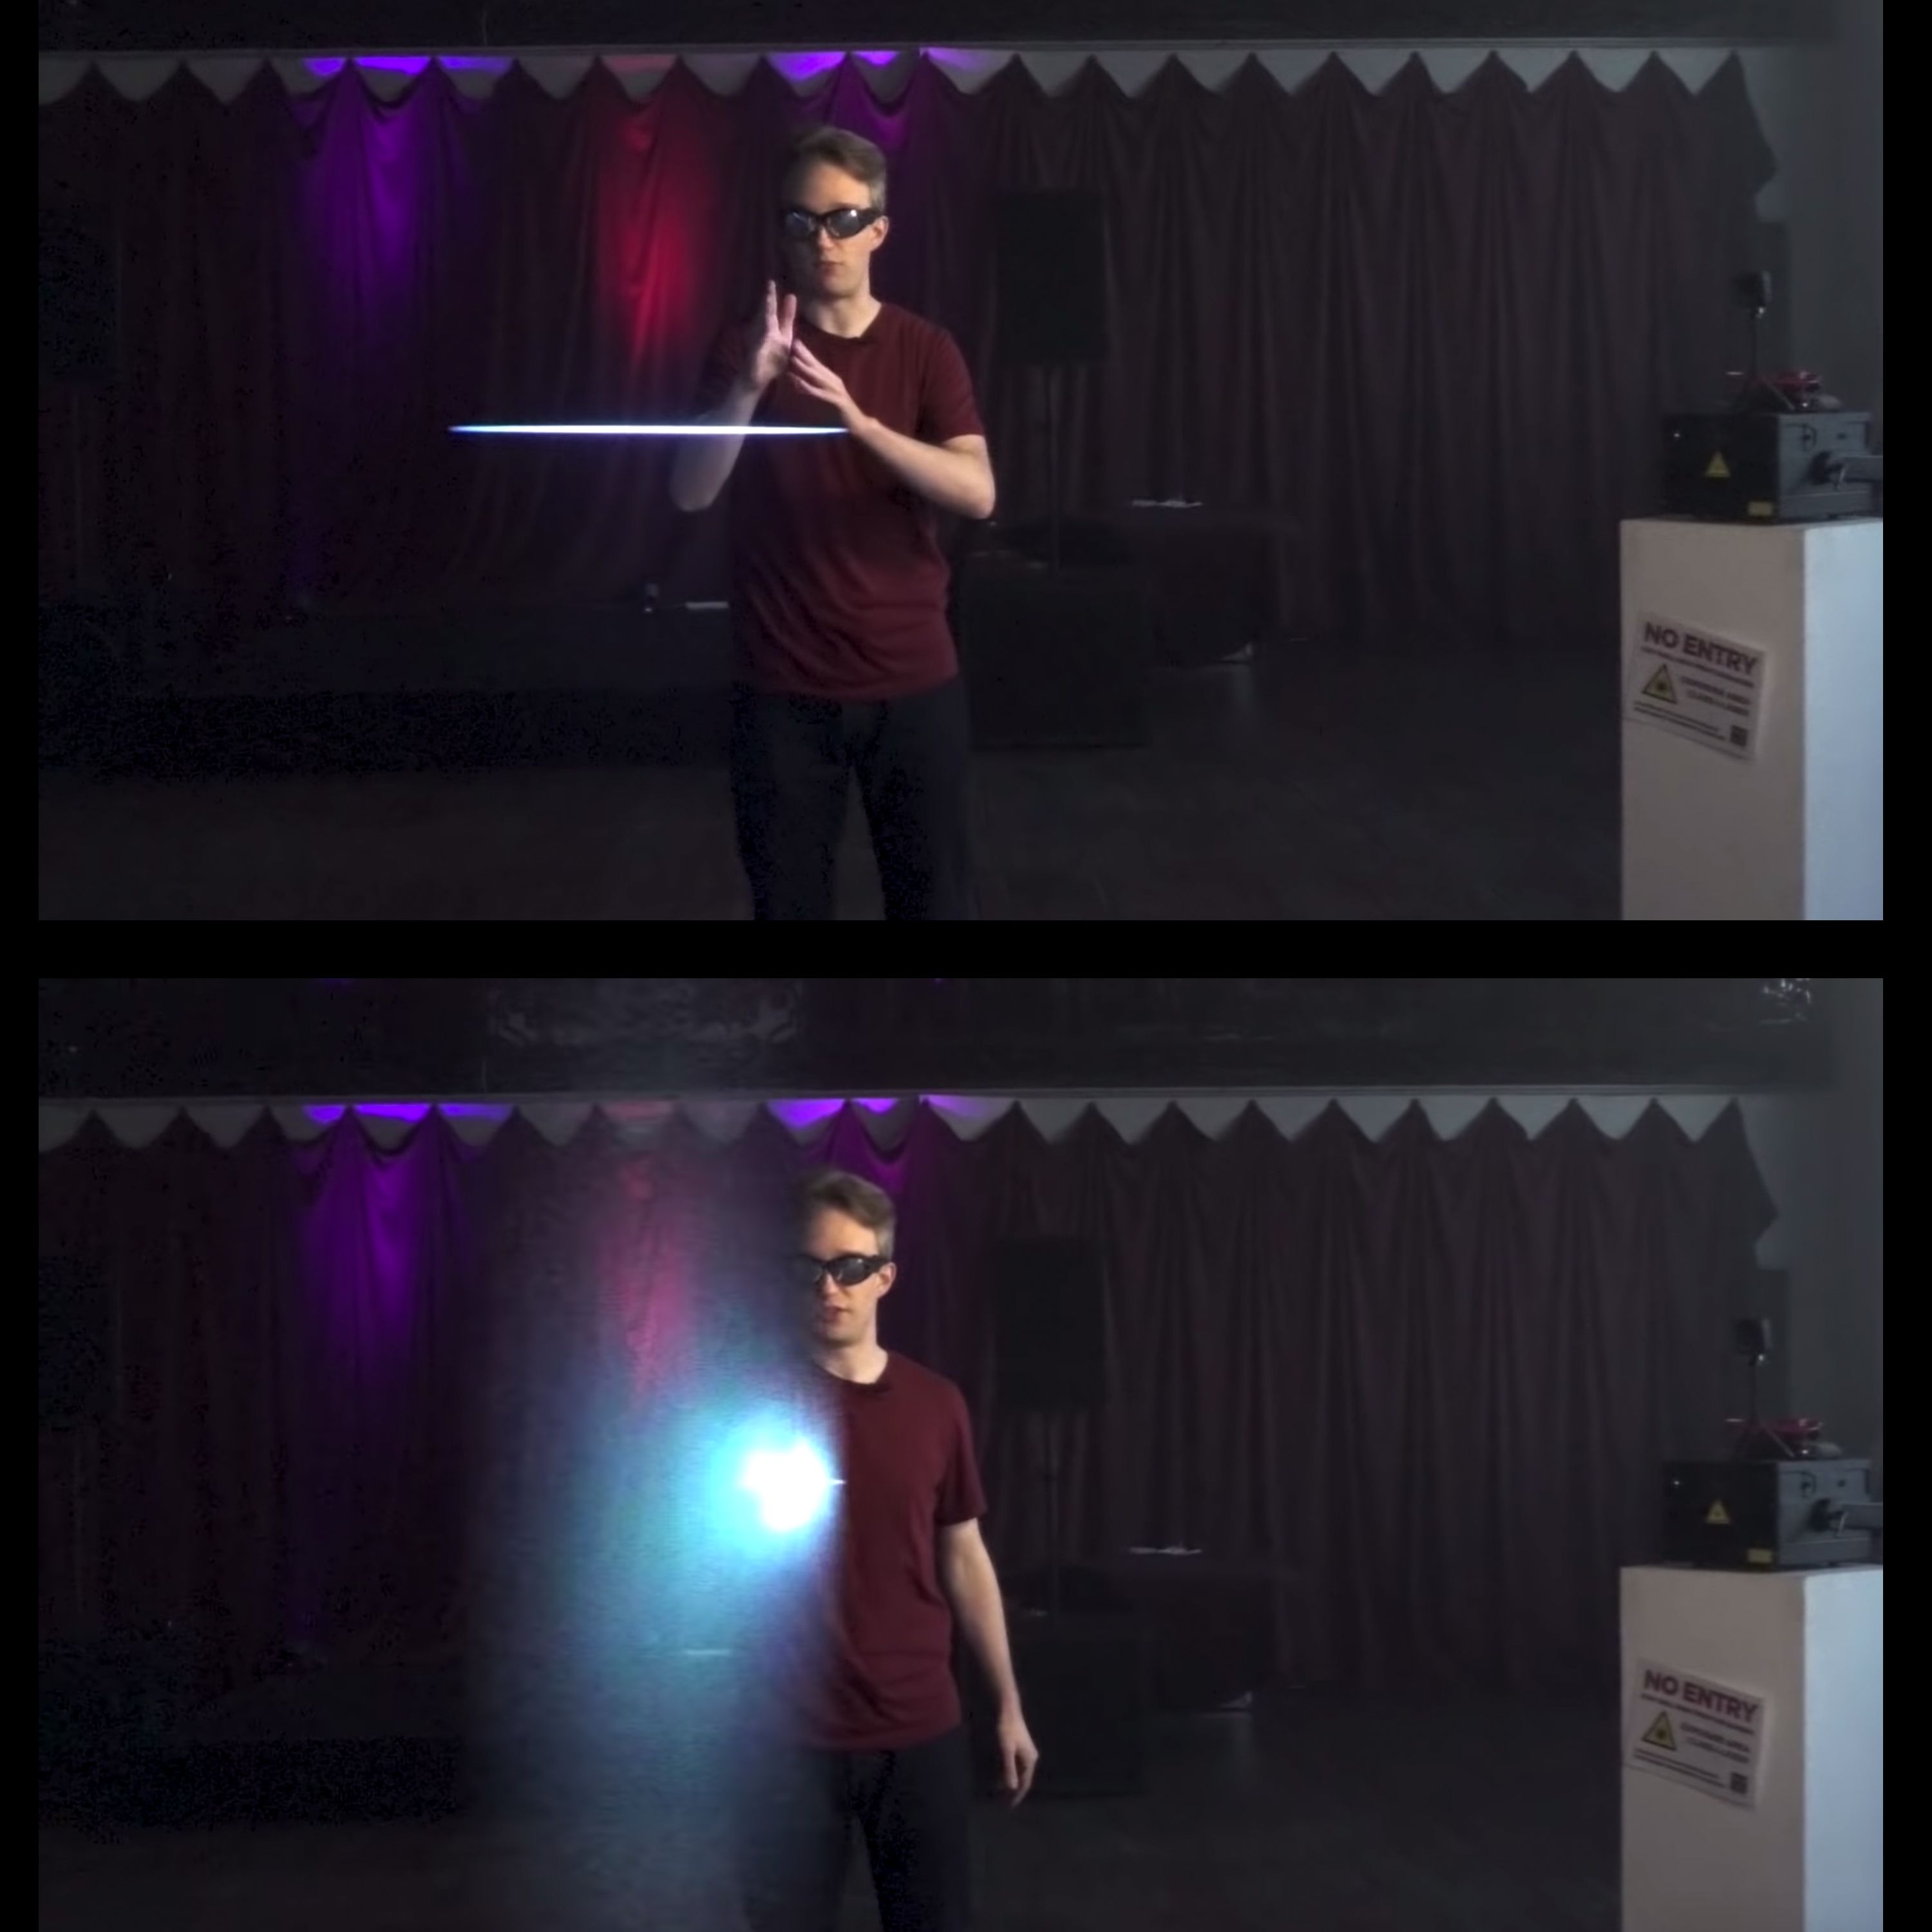 Watch This Guy Catch a Laser Beam - Rolling Shutter Trick